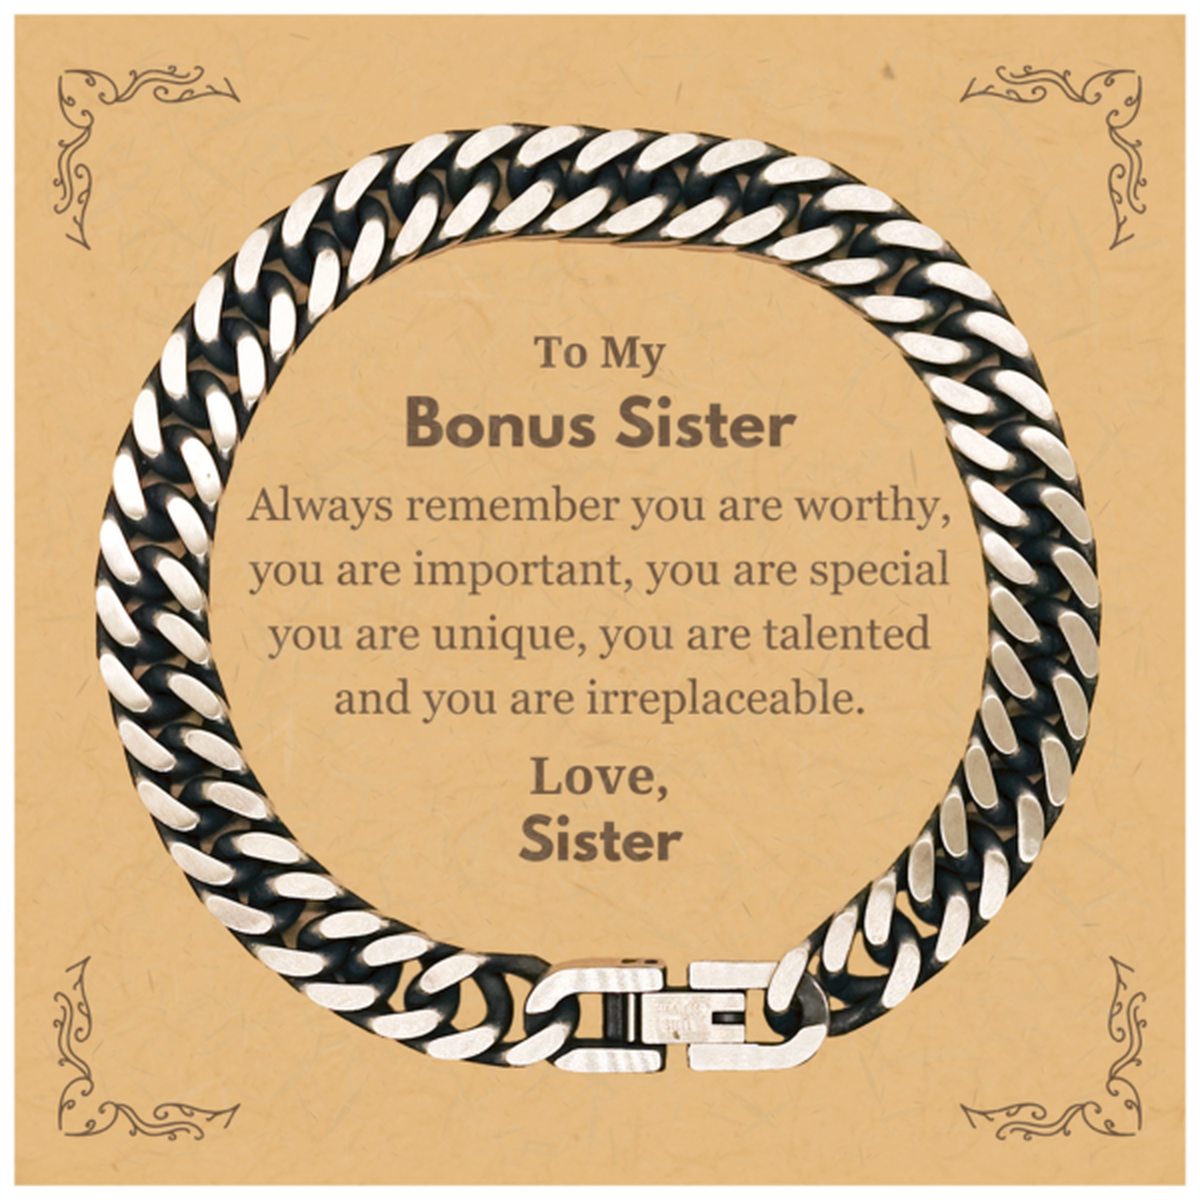 Bonus Sister Birthday Gifts from Sister, Inspirational Cuban Link Chain Bracelet for Bonus Sister Christmas Graduation Gifts for Bonus Sister Always remember you are worthy, you are important. Love, Sister